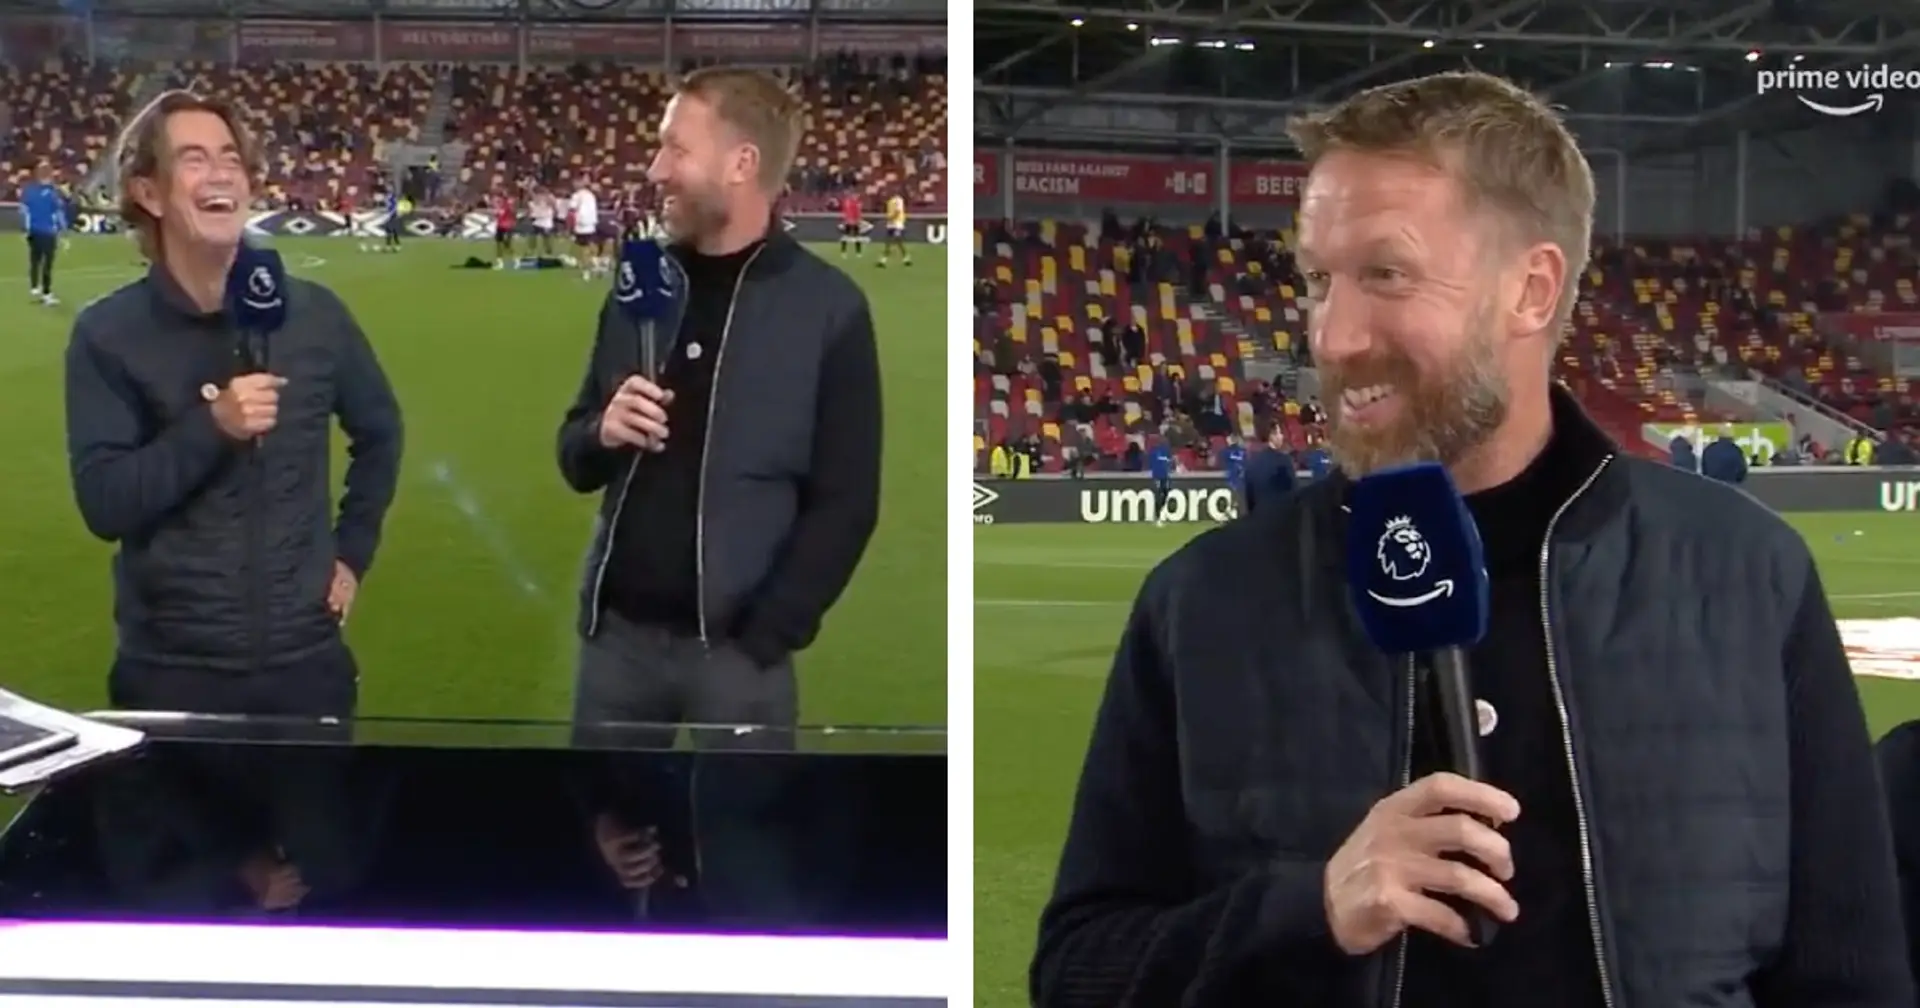 Managers Graham Potter and Thomas Frank interview each other before Brentford vs Chelsea (video)